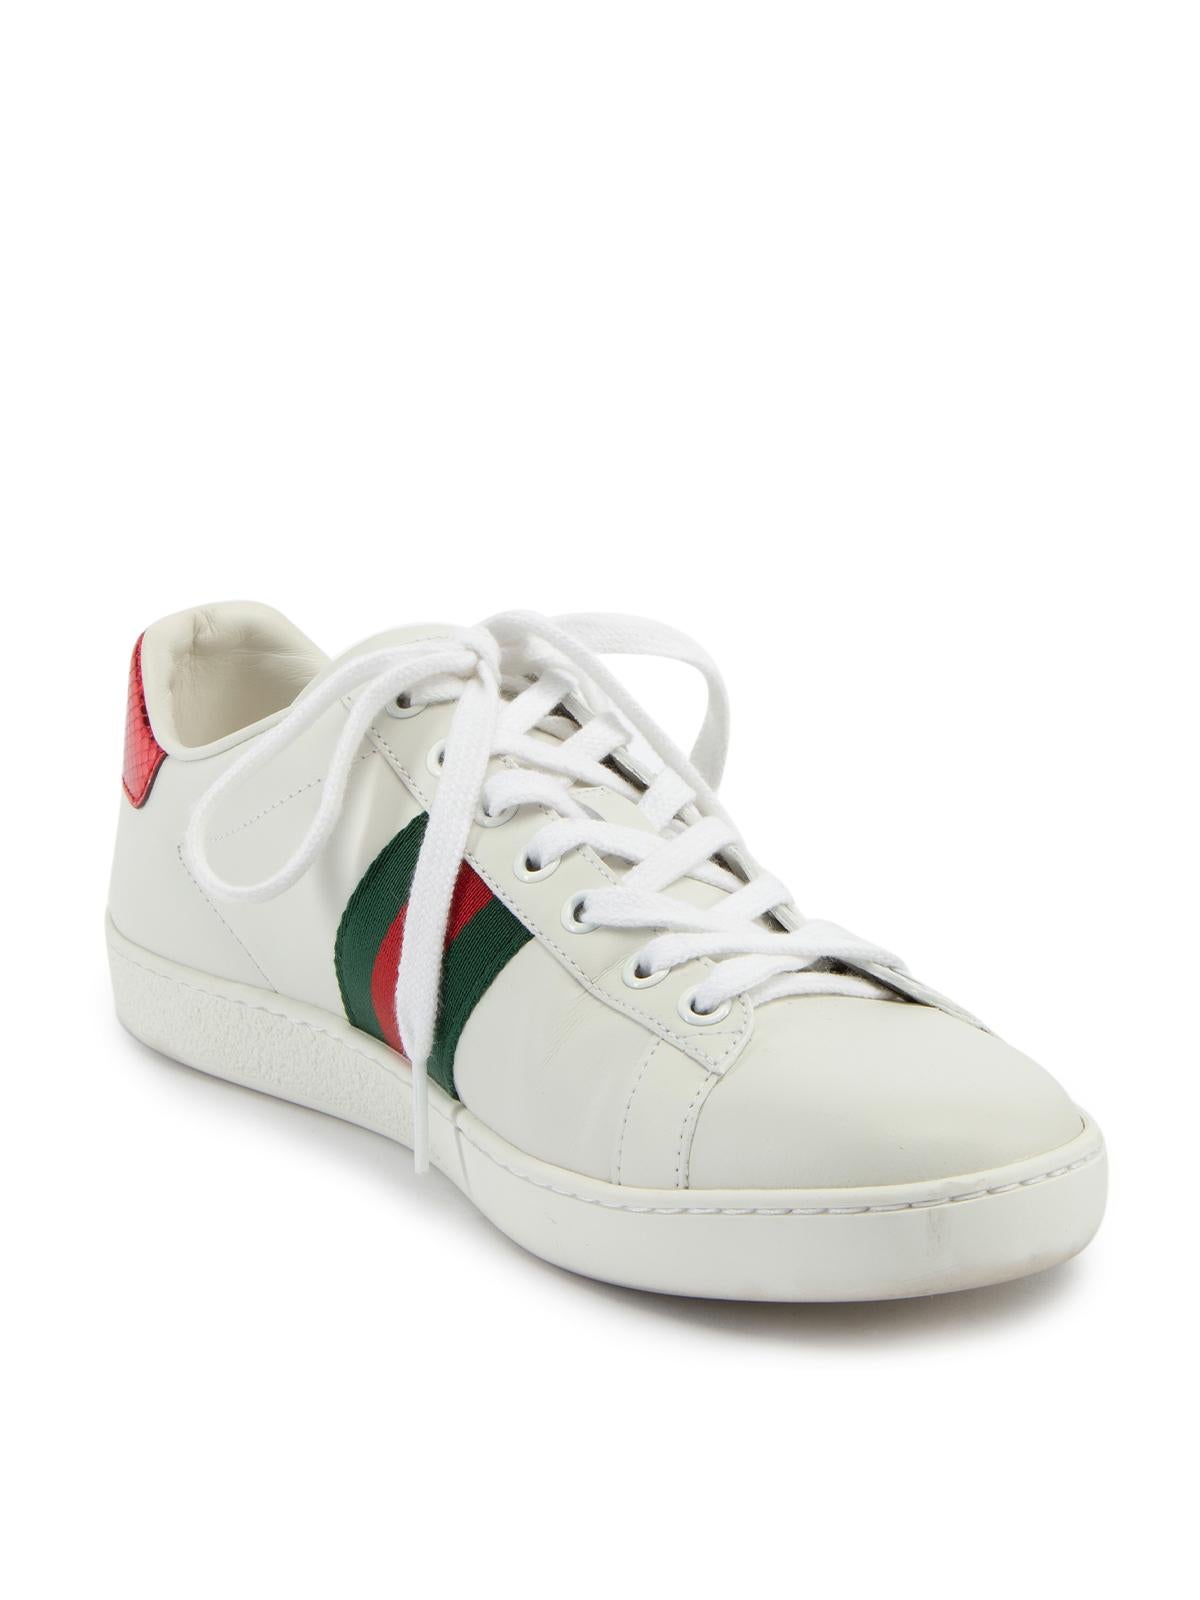 CONDITION is Very good. Minimal wear to trainers is evident. Minimal wear to the midsoles and very light creasing to the vamp on this used Gucci designer resale item. This item comes with the original dustbag and shoe box. Details White Leather Lace